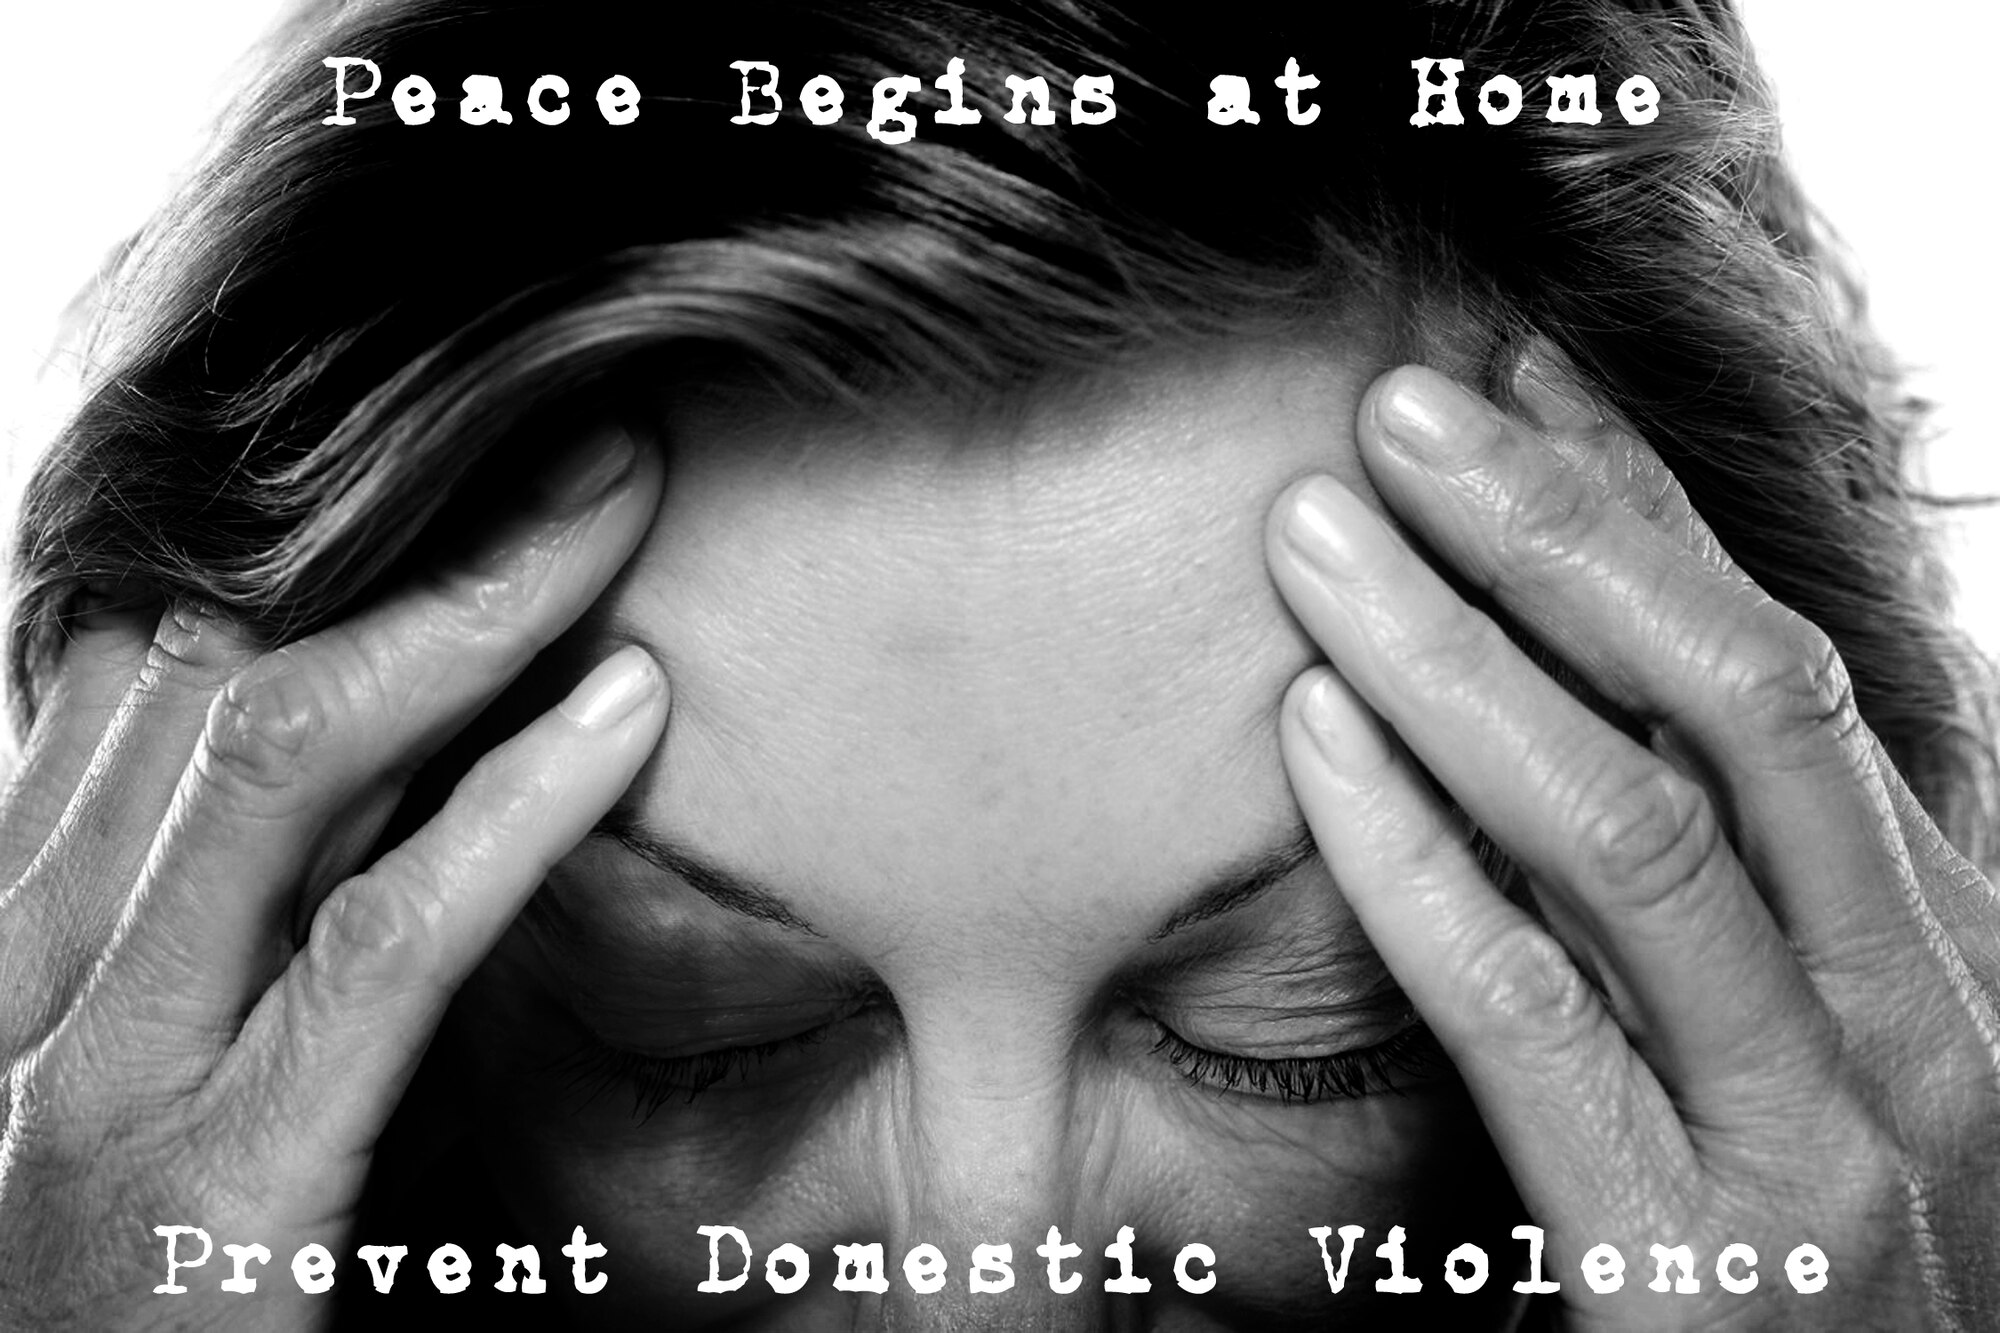 October is annually observed as National Domestic Violence Awareness Month. This year’s theme is “Peace Begins at Home.” For more information on prevention programs available or to report suspected child or partner abuse, please contact the Family Advocacy Program at 229-257-4805. (U.S. Air Force illustration by Staff Sgt. Jamal D. Sutter/Released)